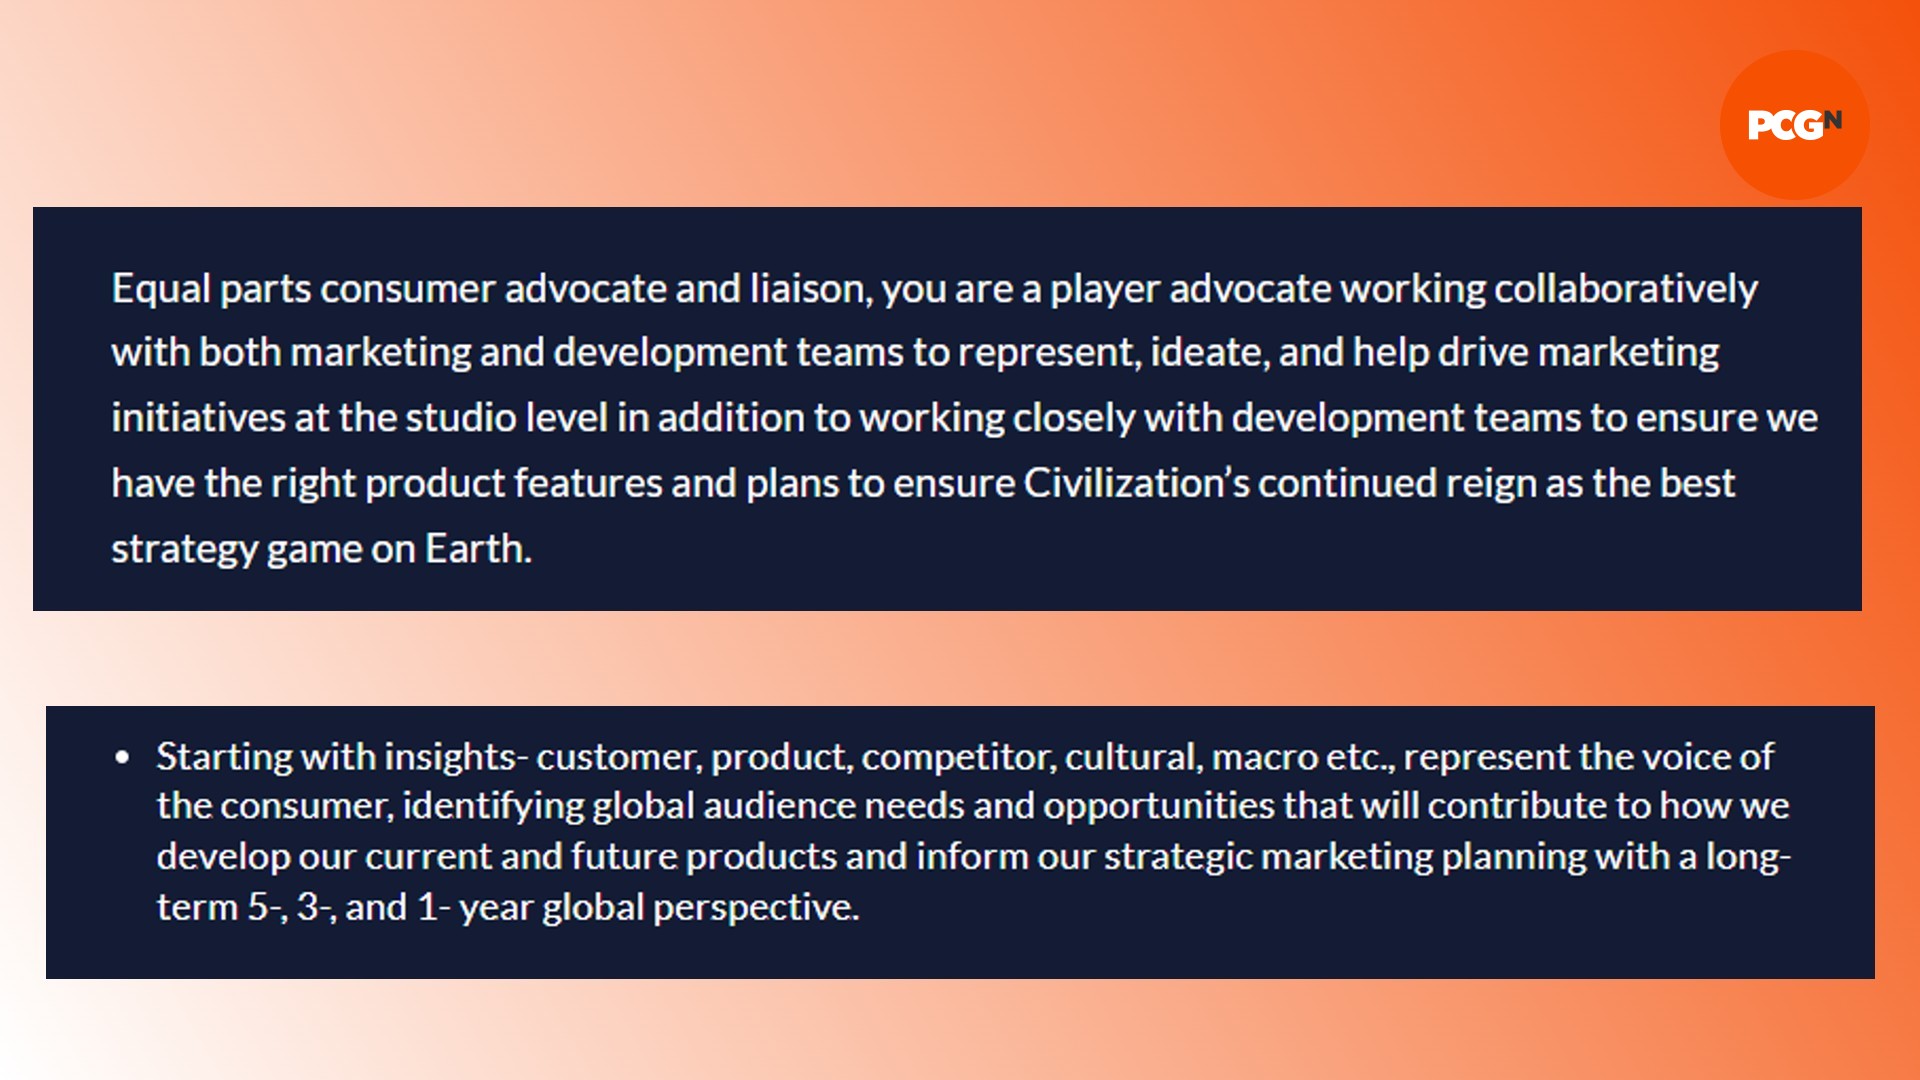 Civilization 7 Firaxis details: A listing from Firaxis regarding strategy game Civilization